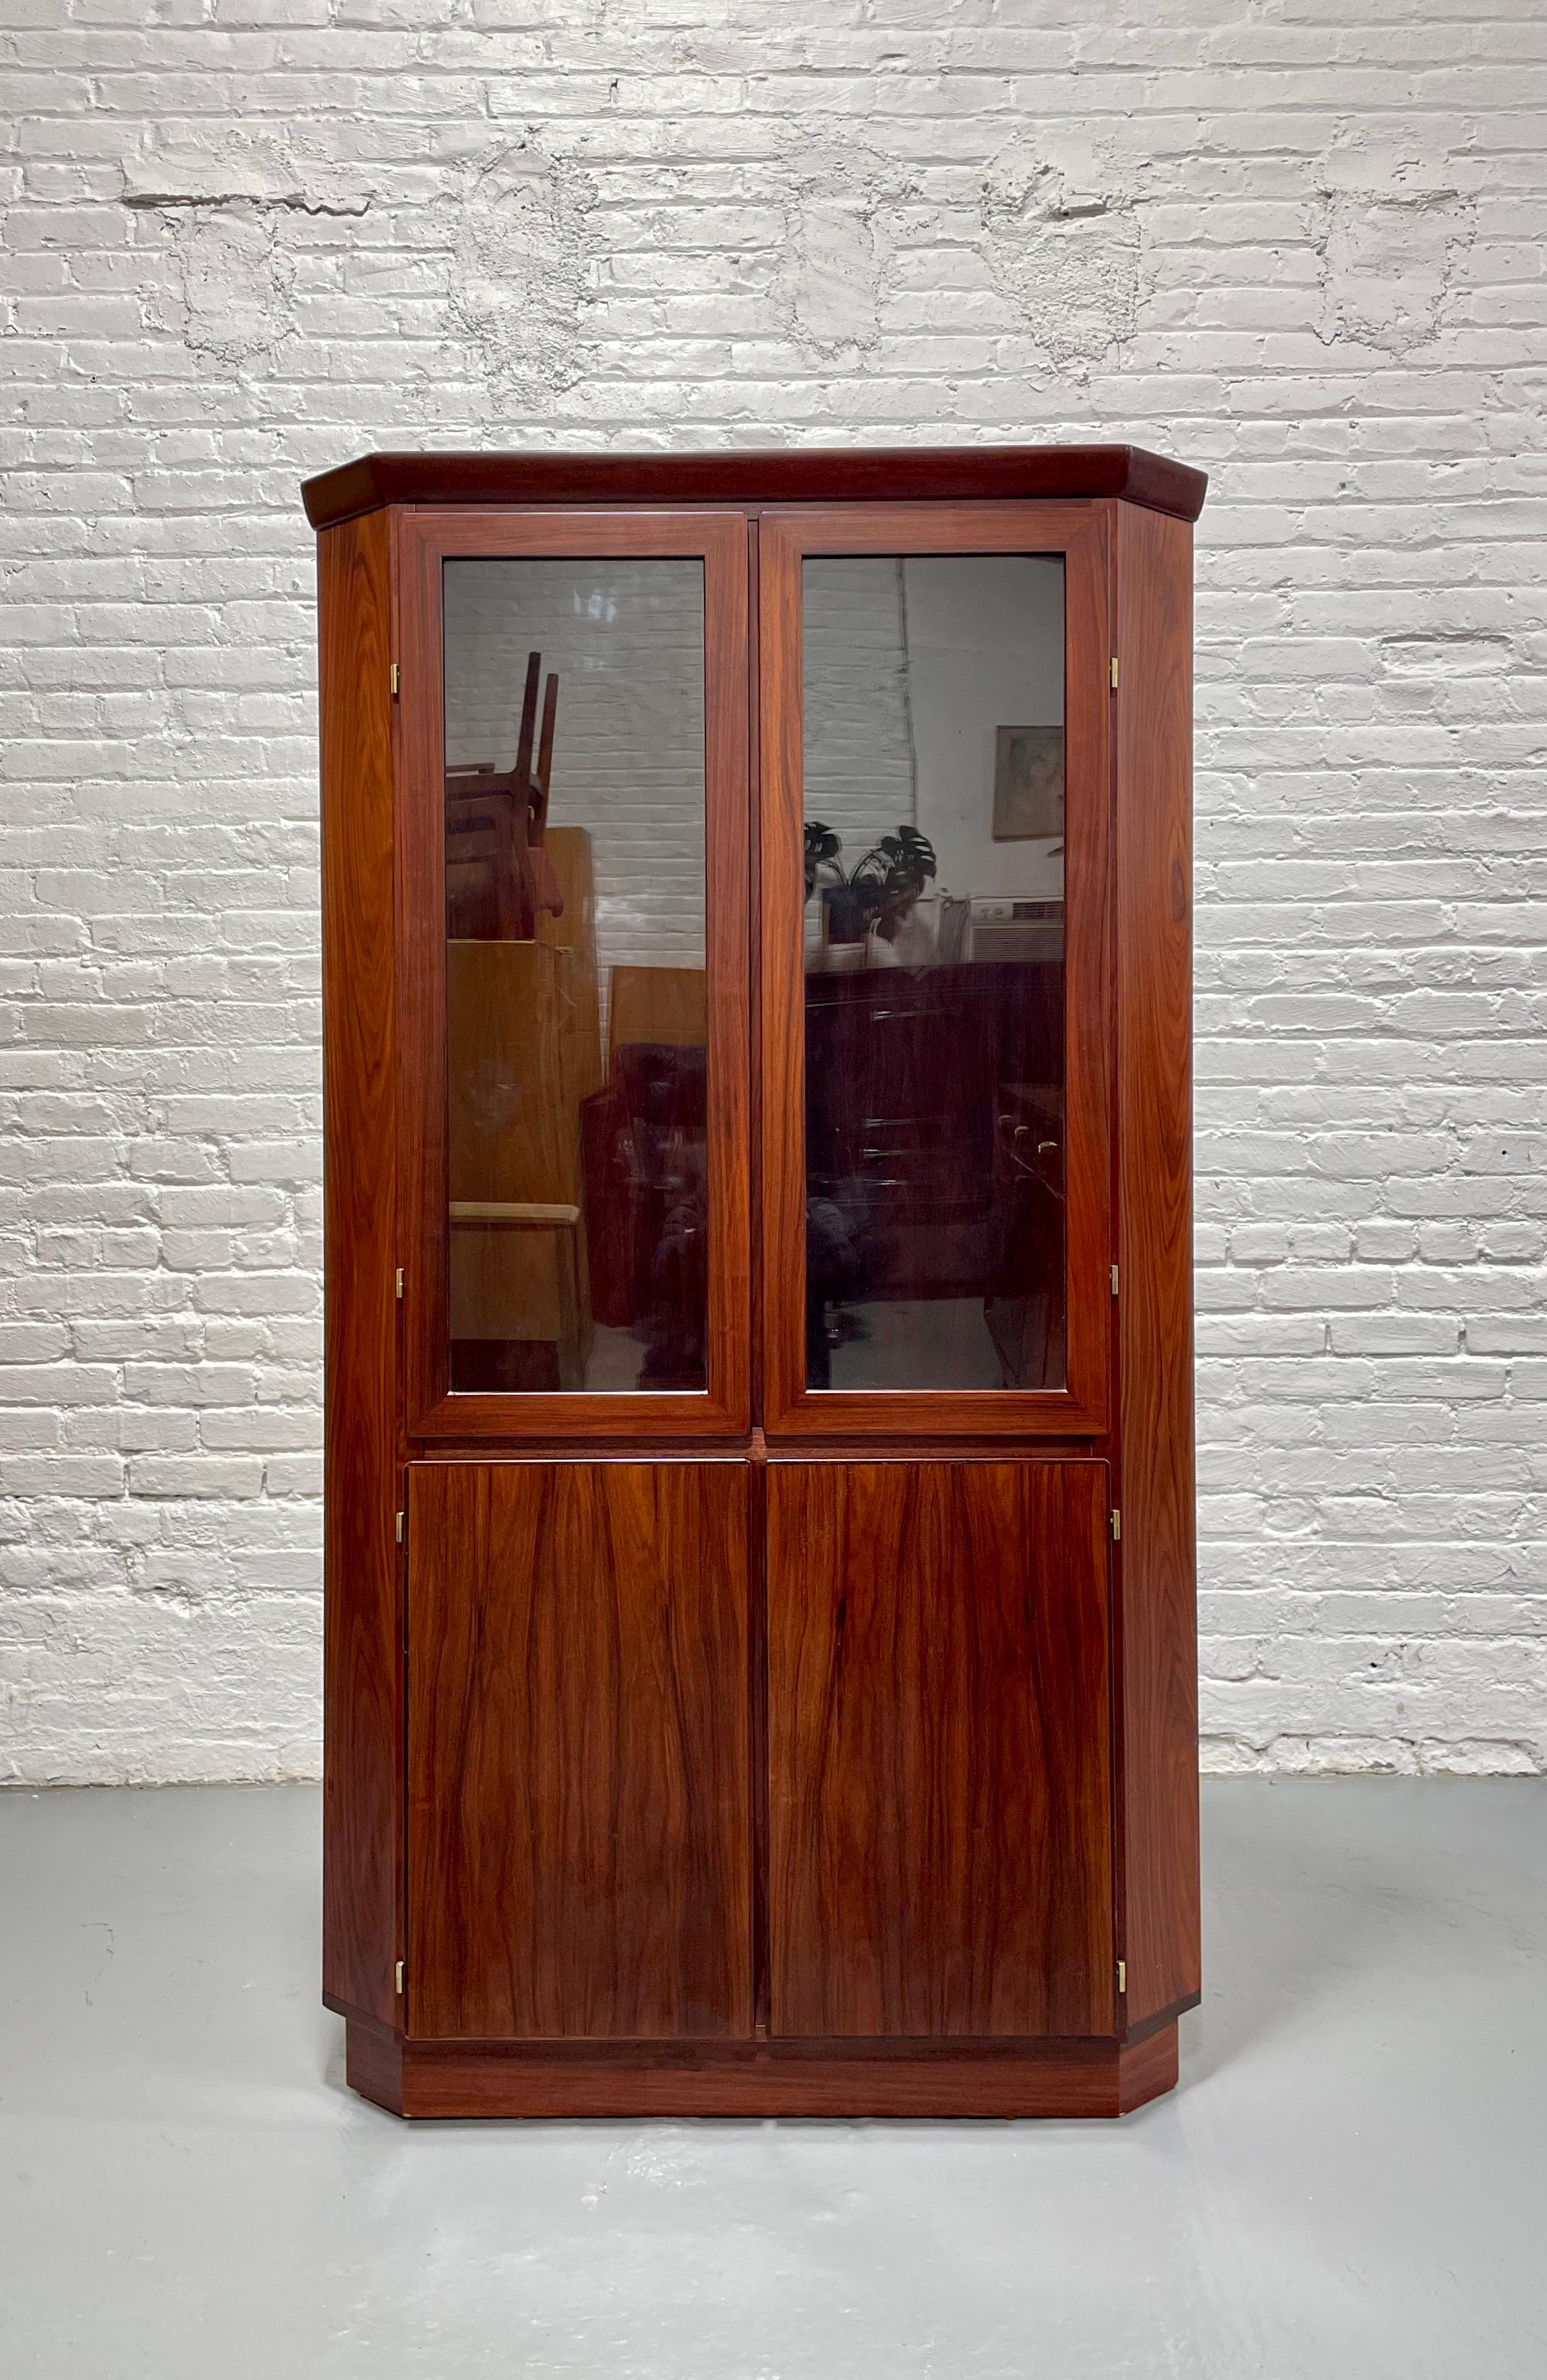 Mid Century Modern Rosewood corner bookcase / china cabinet, Made in Denmark by Skovby. This piece boasts stunning wood grains, both inside and outside the cabinet and is perfect where space is an issue as it offers plenty of storage space yet fits